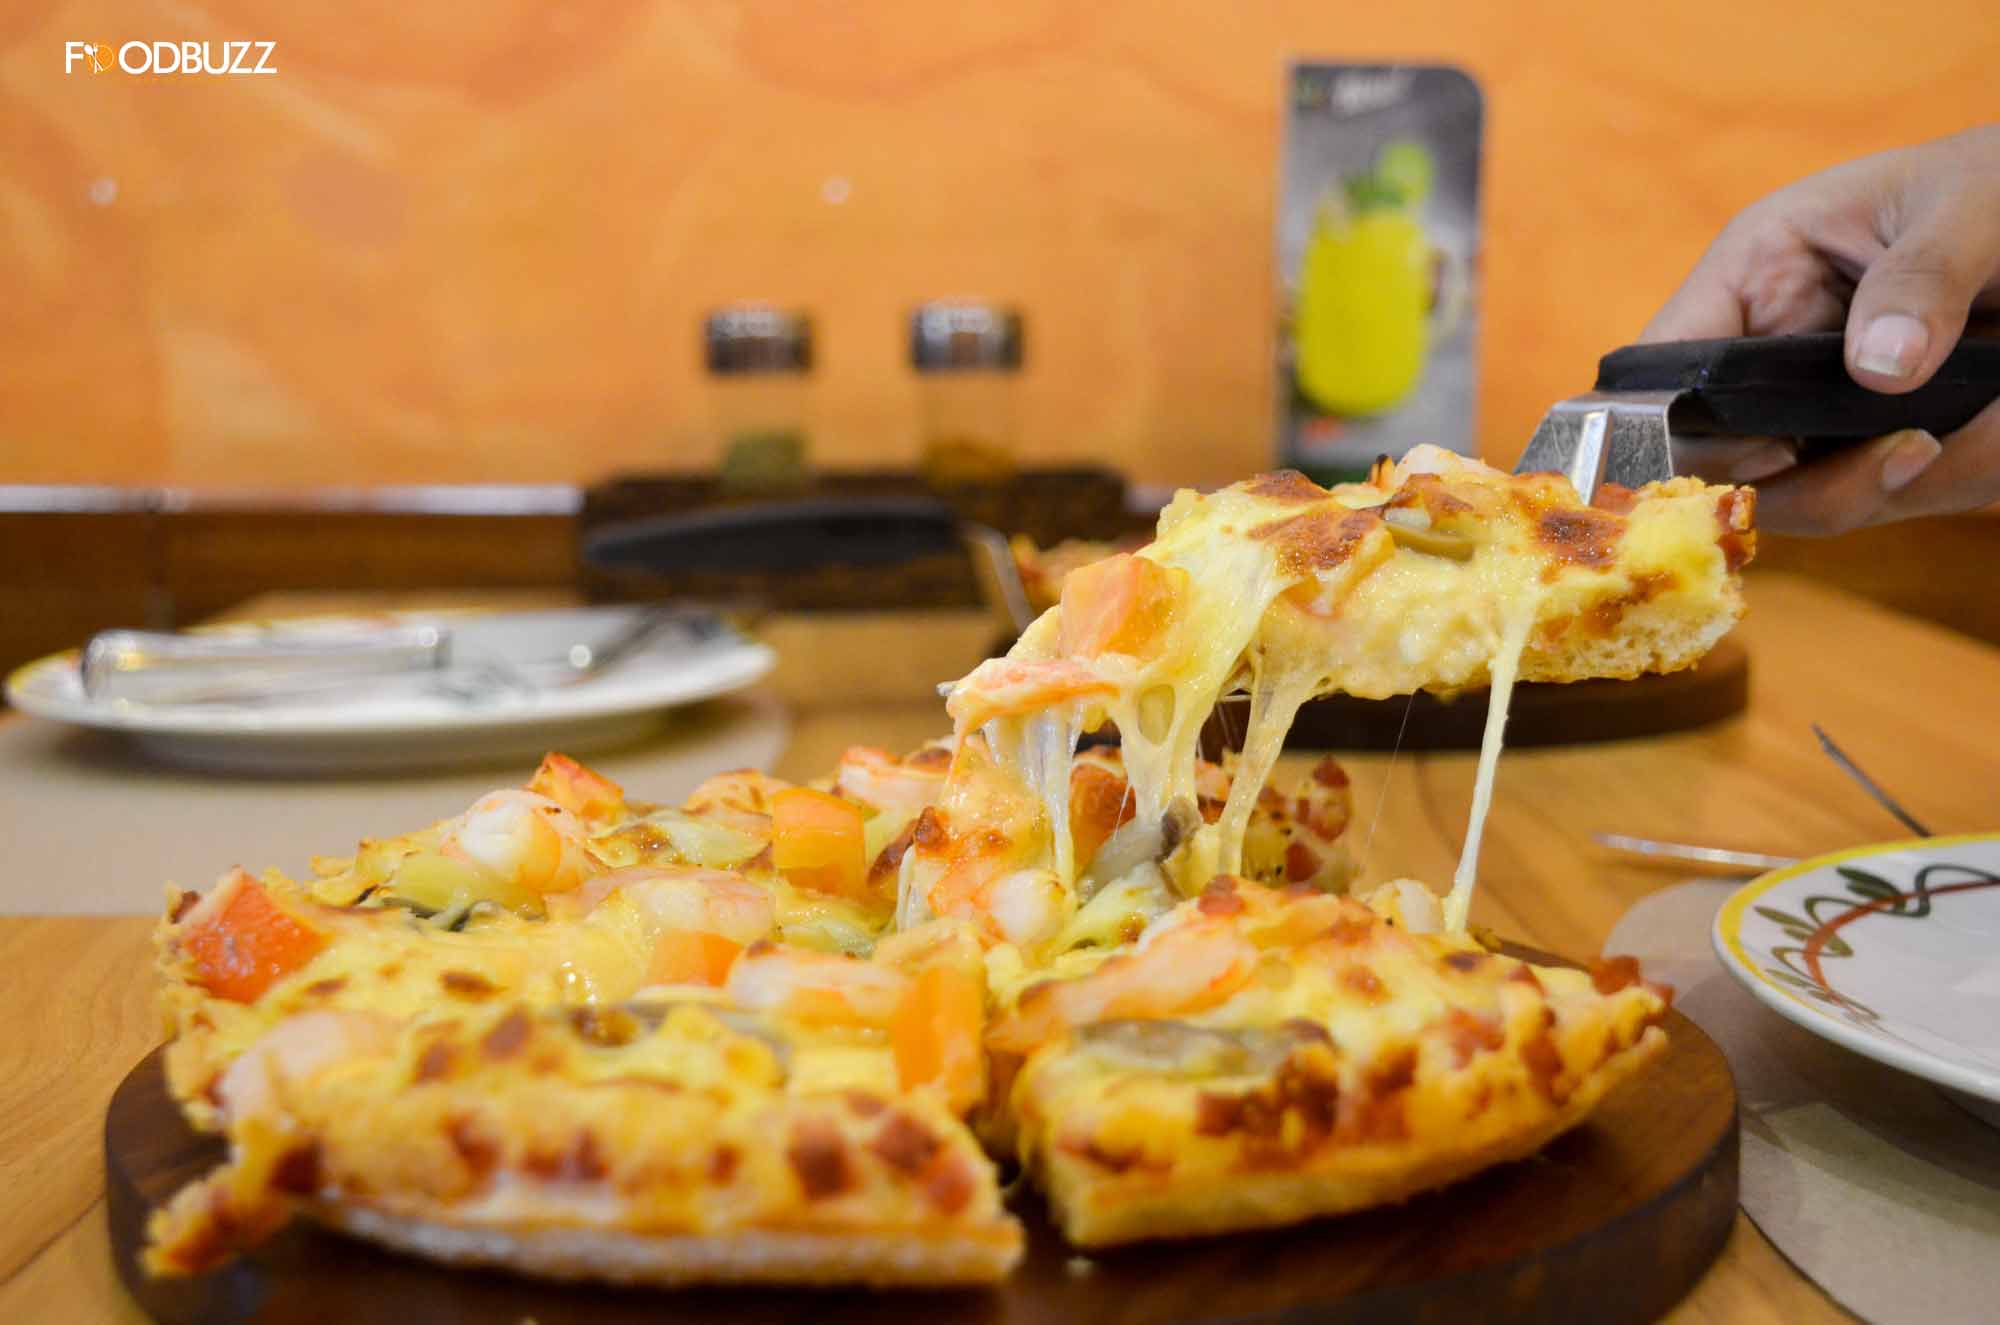 the melty and gooey cheese on the pizza will melt your heart.